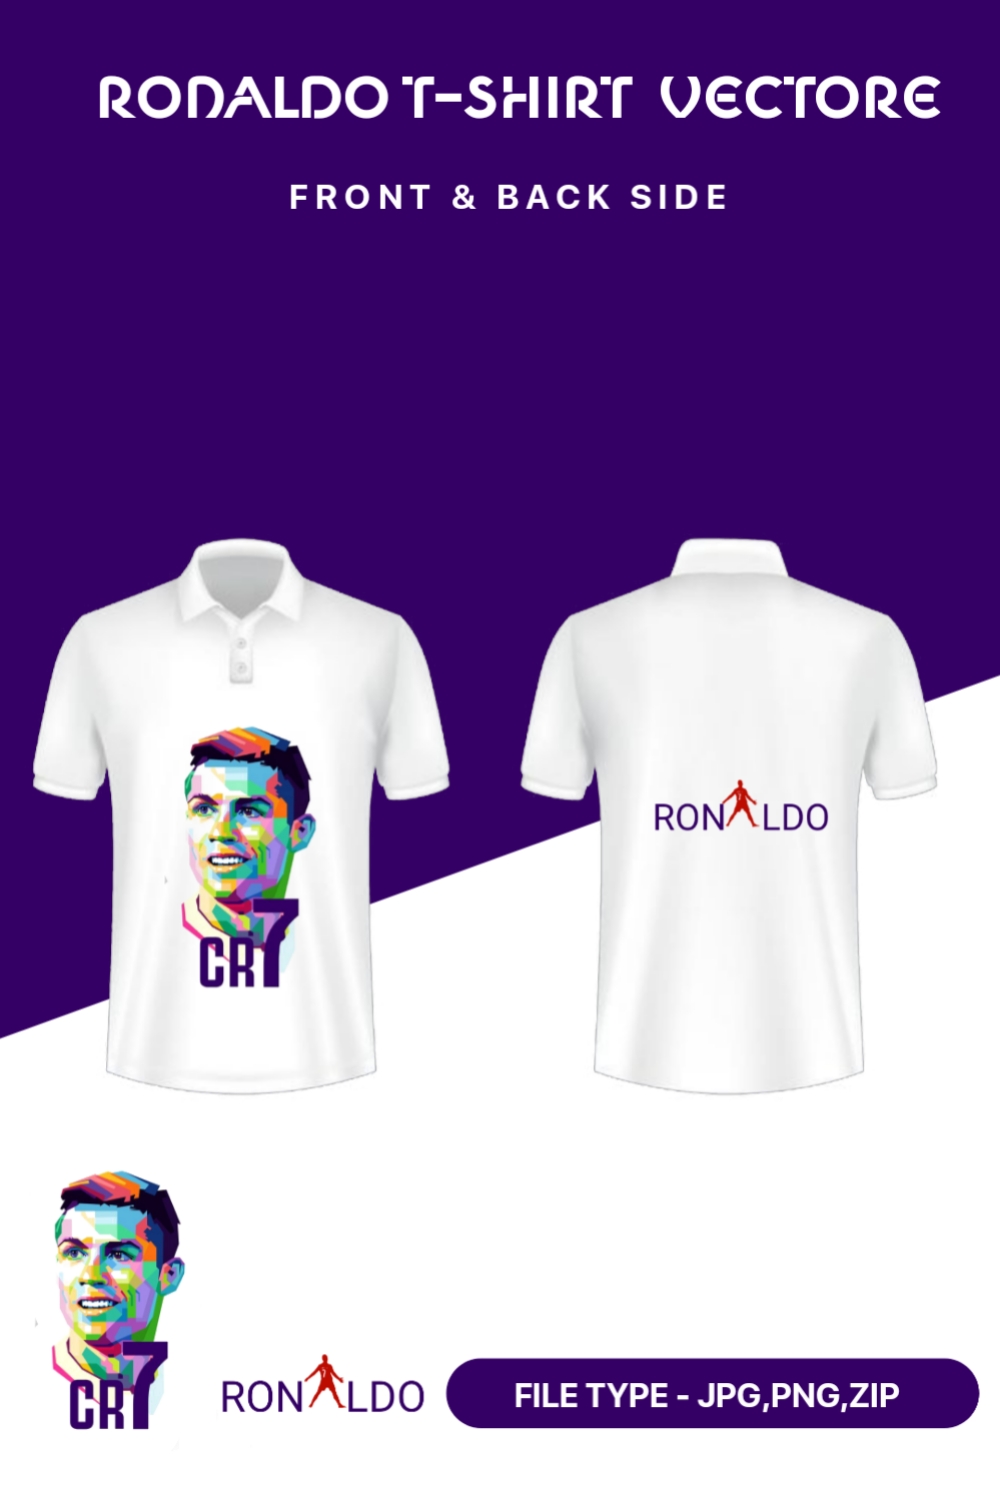 Cristiano Ronaldo t-shirt design front & back side pinterest preview image.